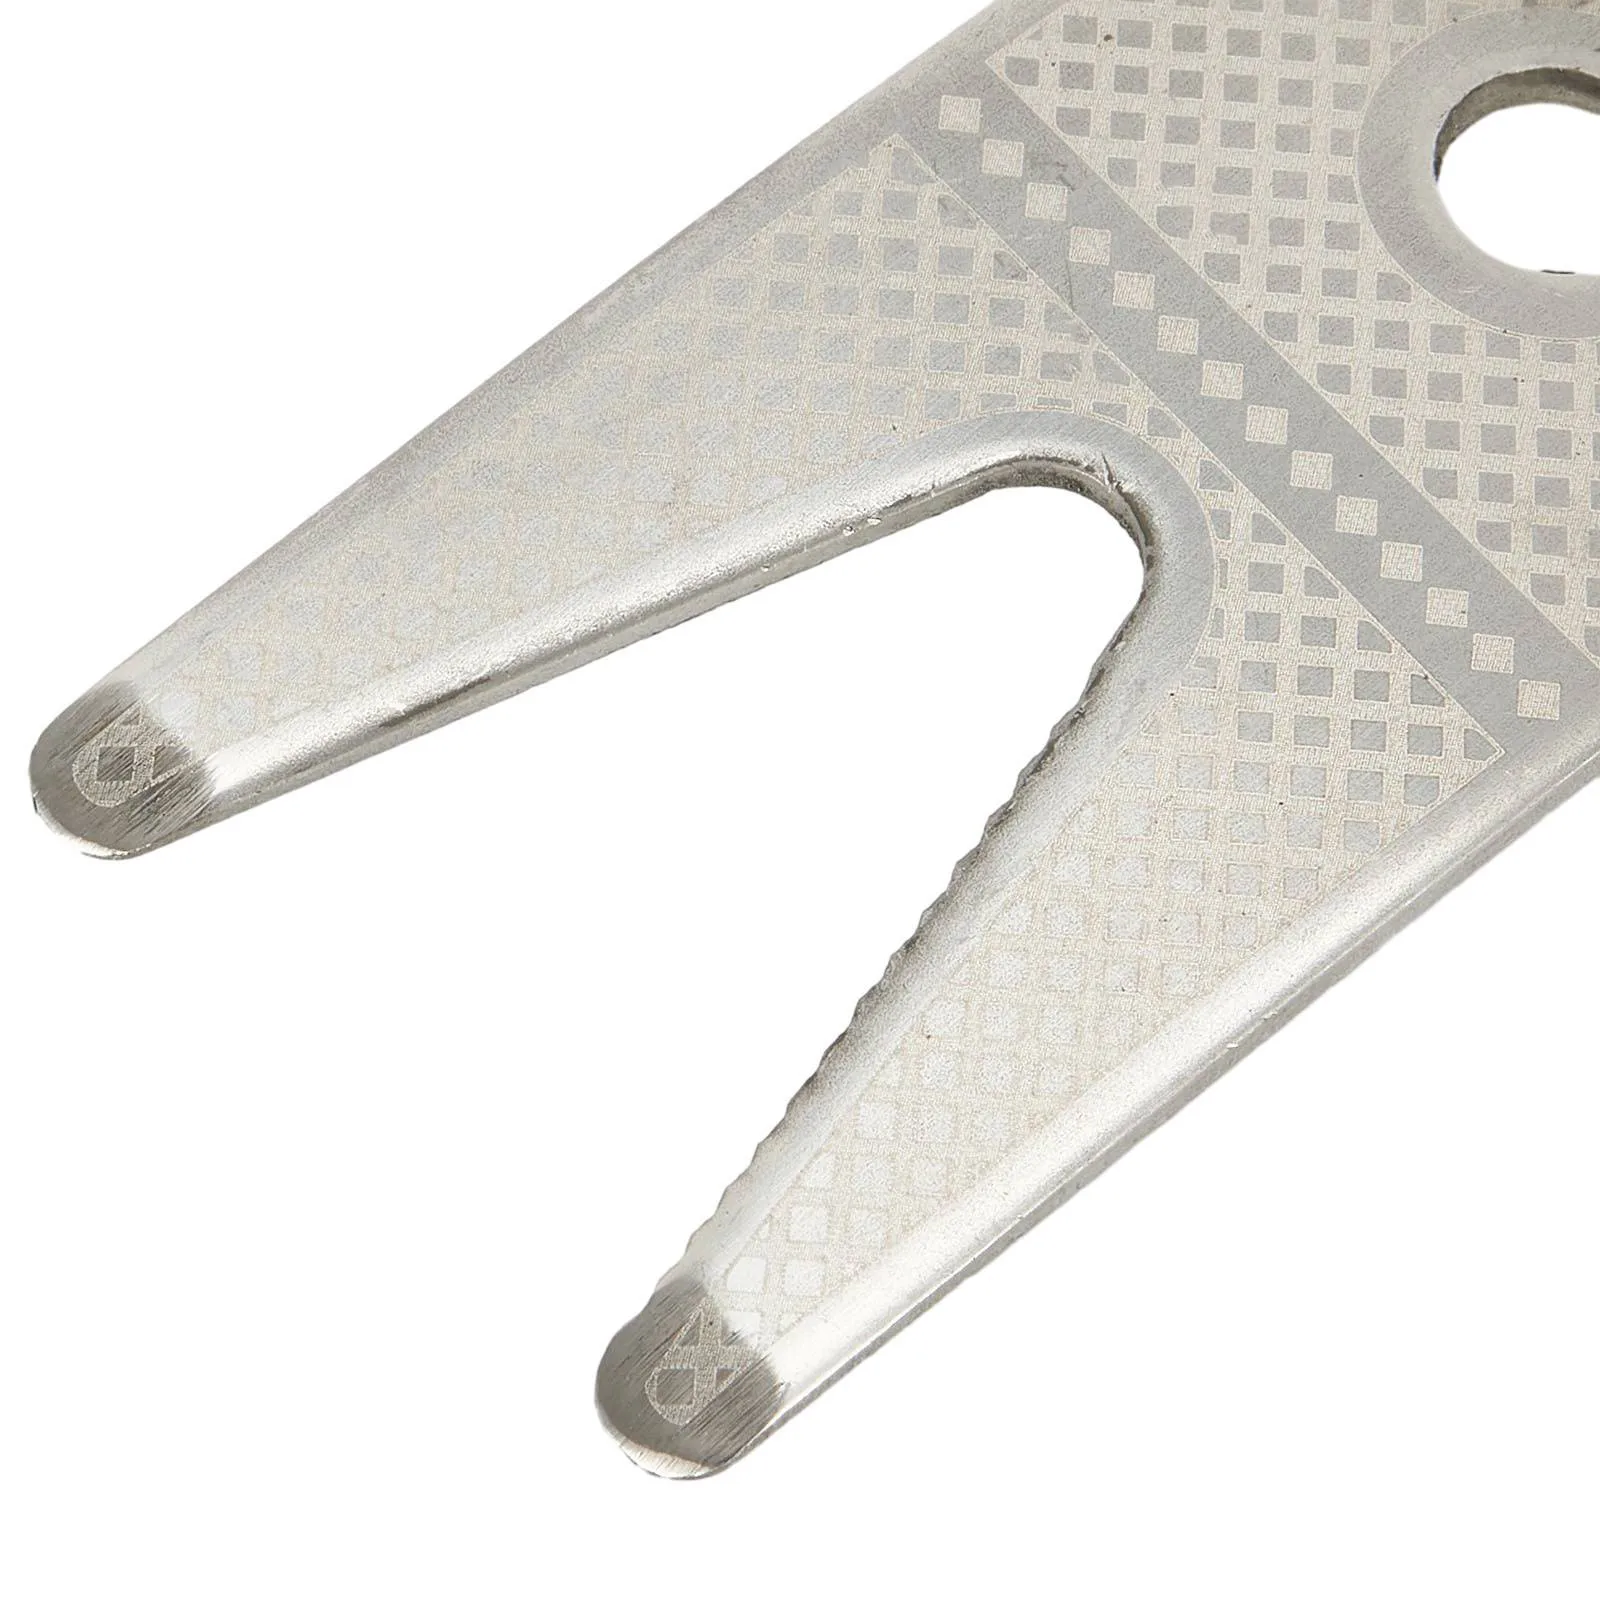 

Guitar Bass Multi Spanner Wrench Ideal Luthier Tool for Fixing Loose Jacks and Pots Crafted in Durable Stainless Steel